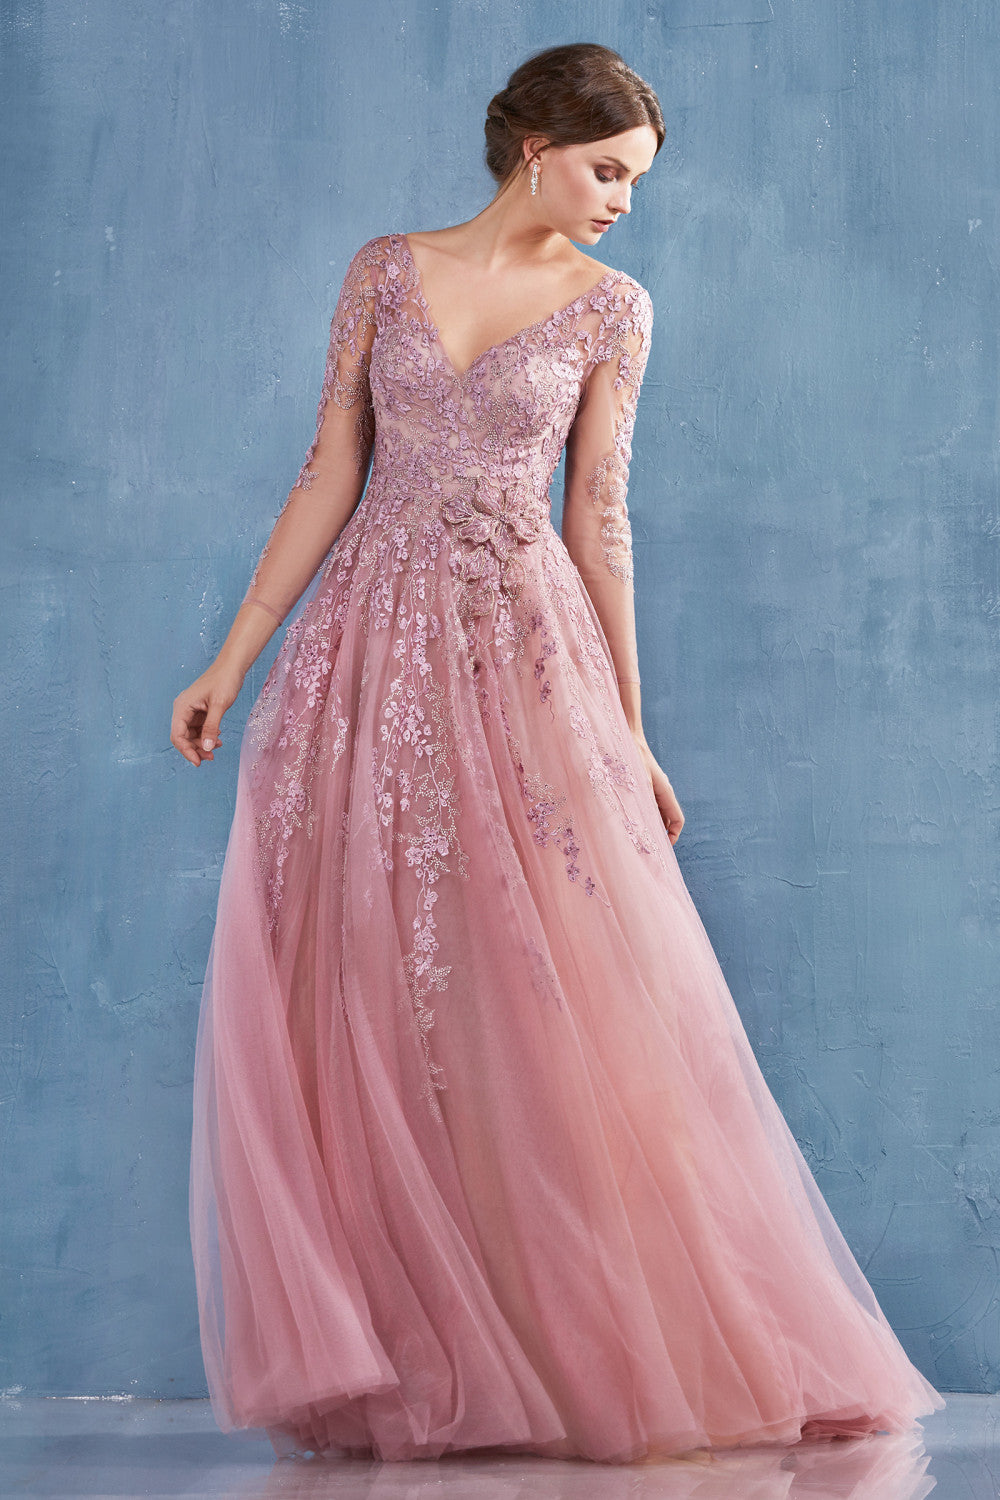 Long Sleeve Floral Applique Tulle A-line Princess Gown A0988 - Andrea & Leo Couture - Special Occasion